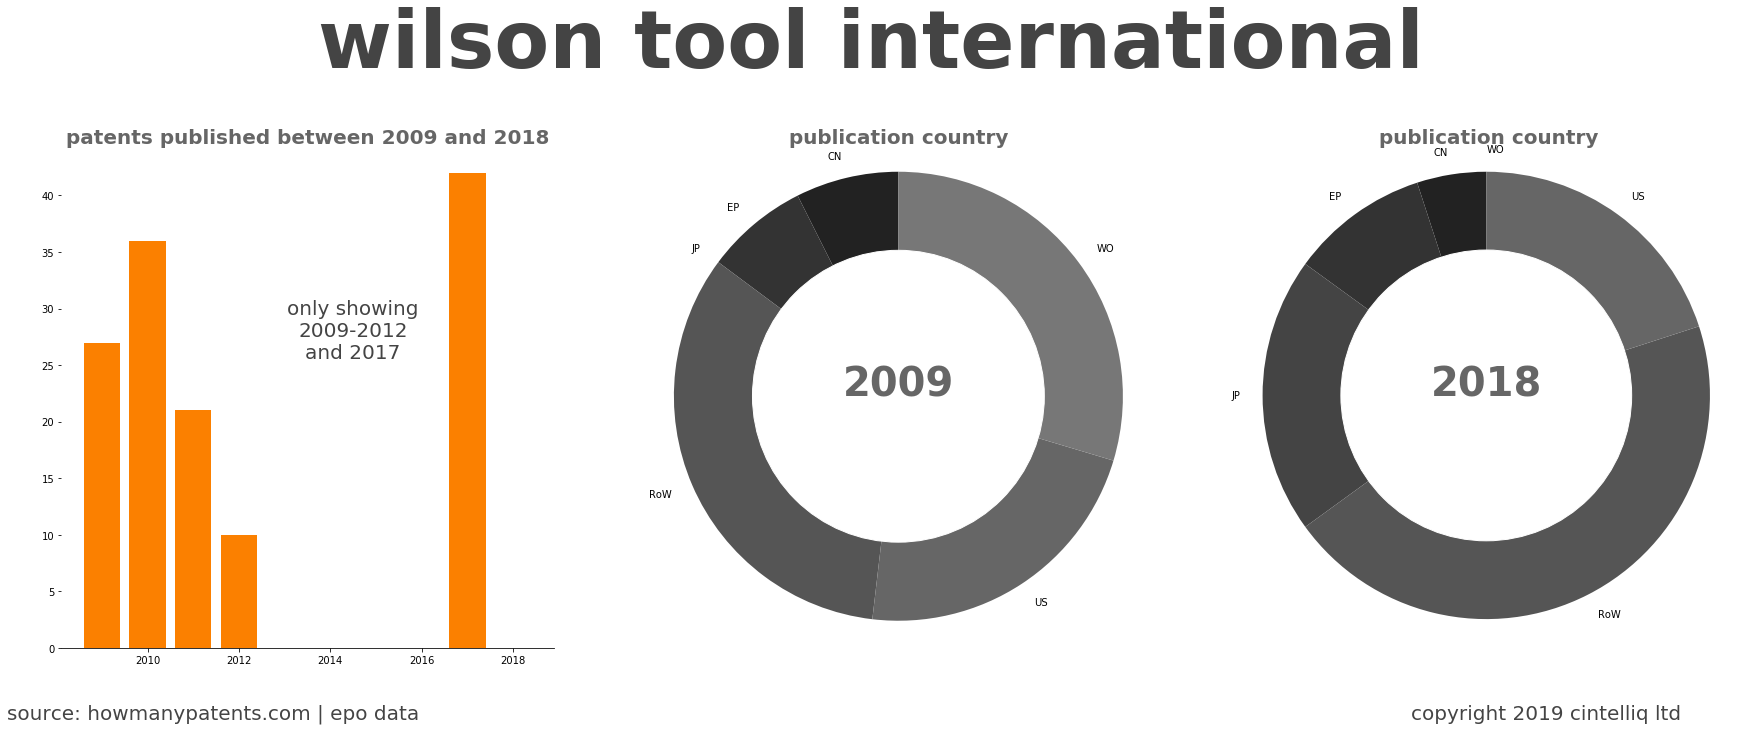 summary of patents for Wilson Tool International